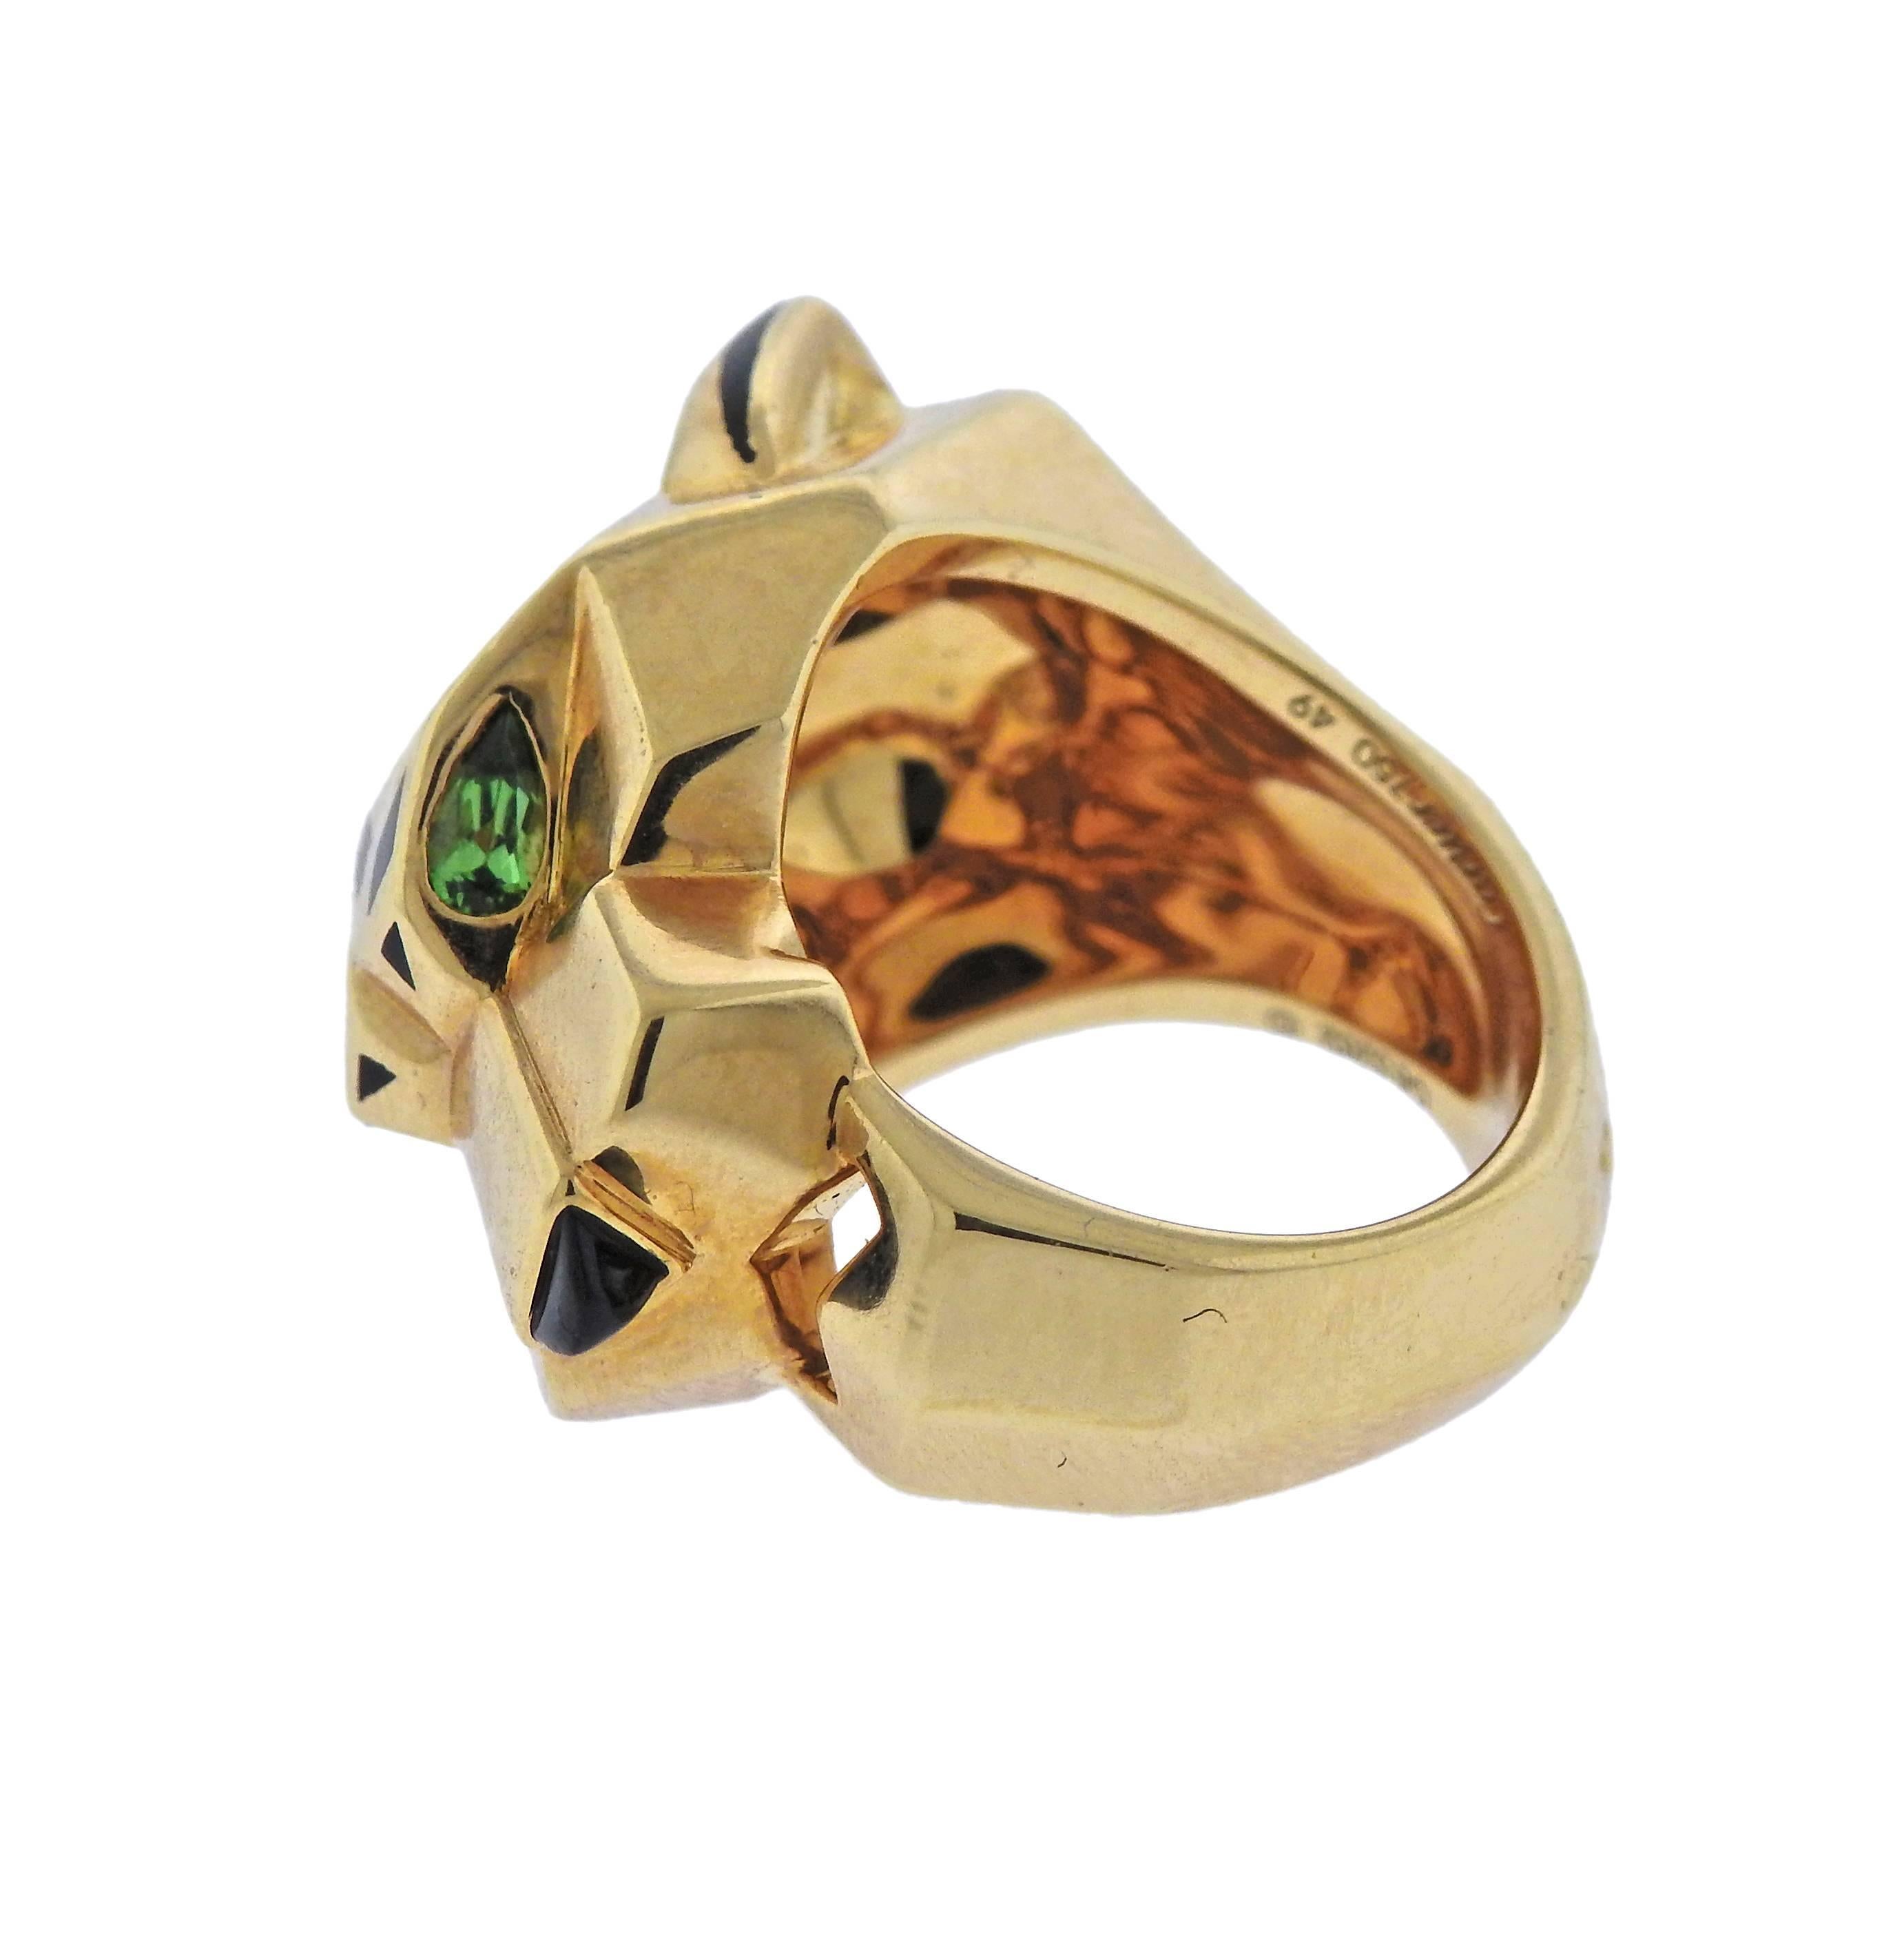 Iconic Panthere ring by Cartier, decorated with emerald eyes, onyx nose and enamel. Ring size - 5, ring top - 18mm x 25mm, weighs 23.7 grams. Marked: French assay marks, Cartier, 750, 49, OE5262.
Retail $11200.